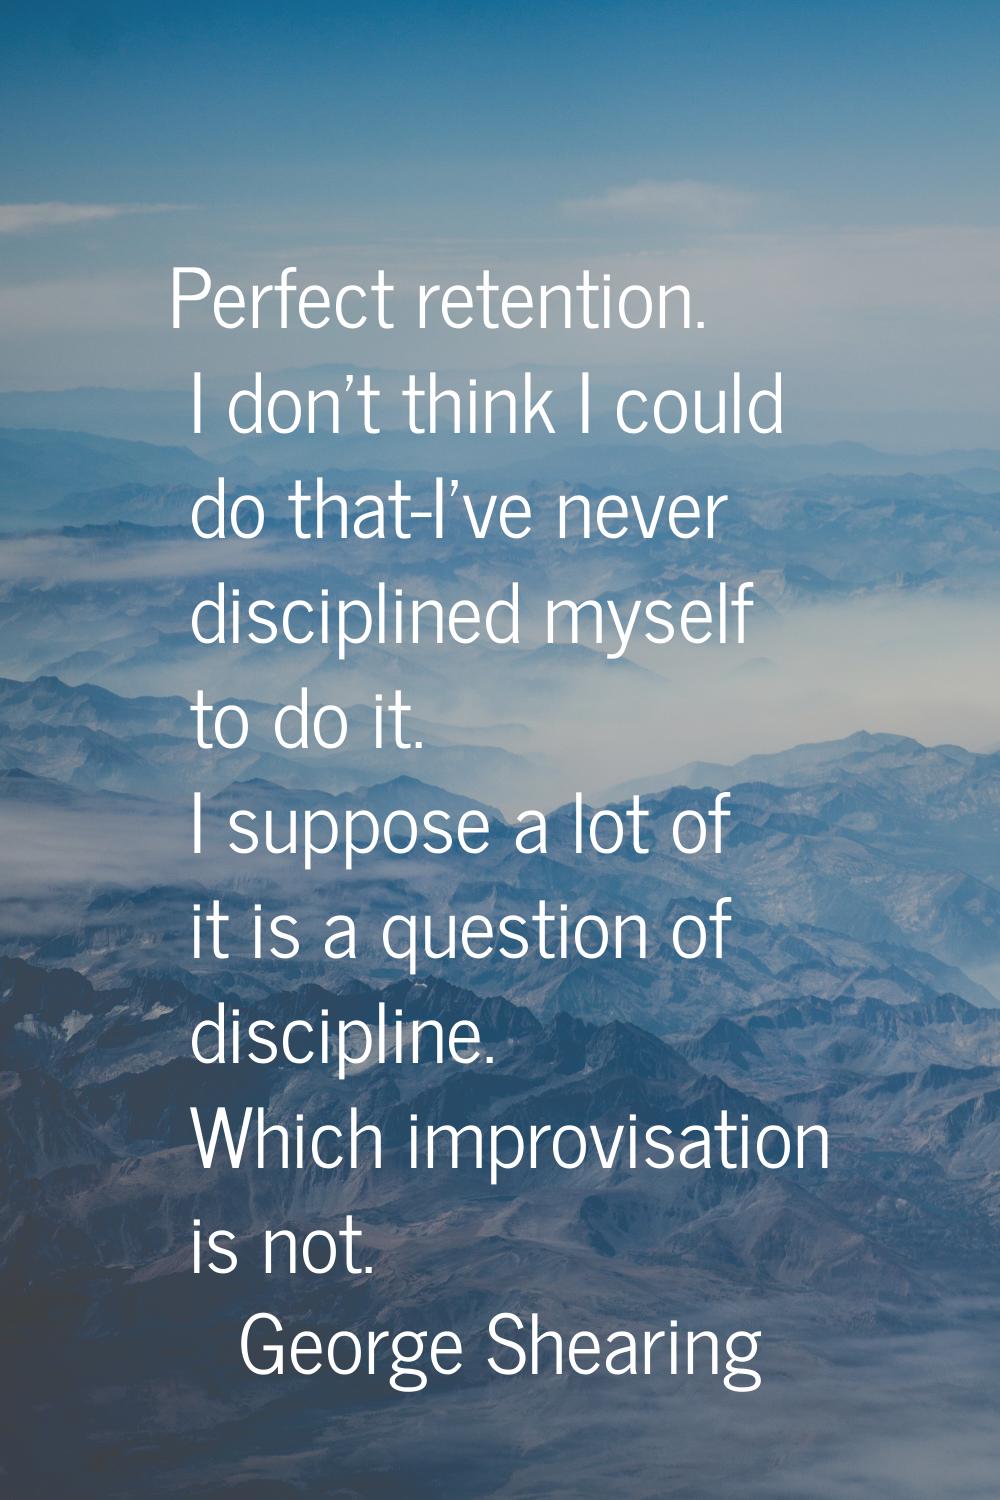 Perfect retention. I don't think I could do that-I've never disciplined myself to do it. I suppose 